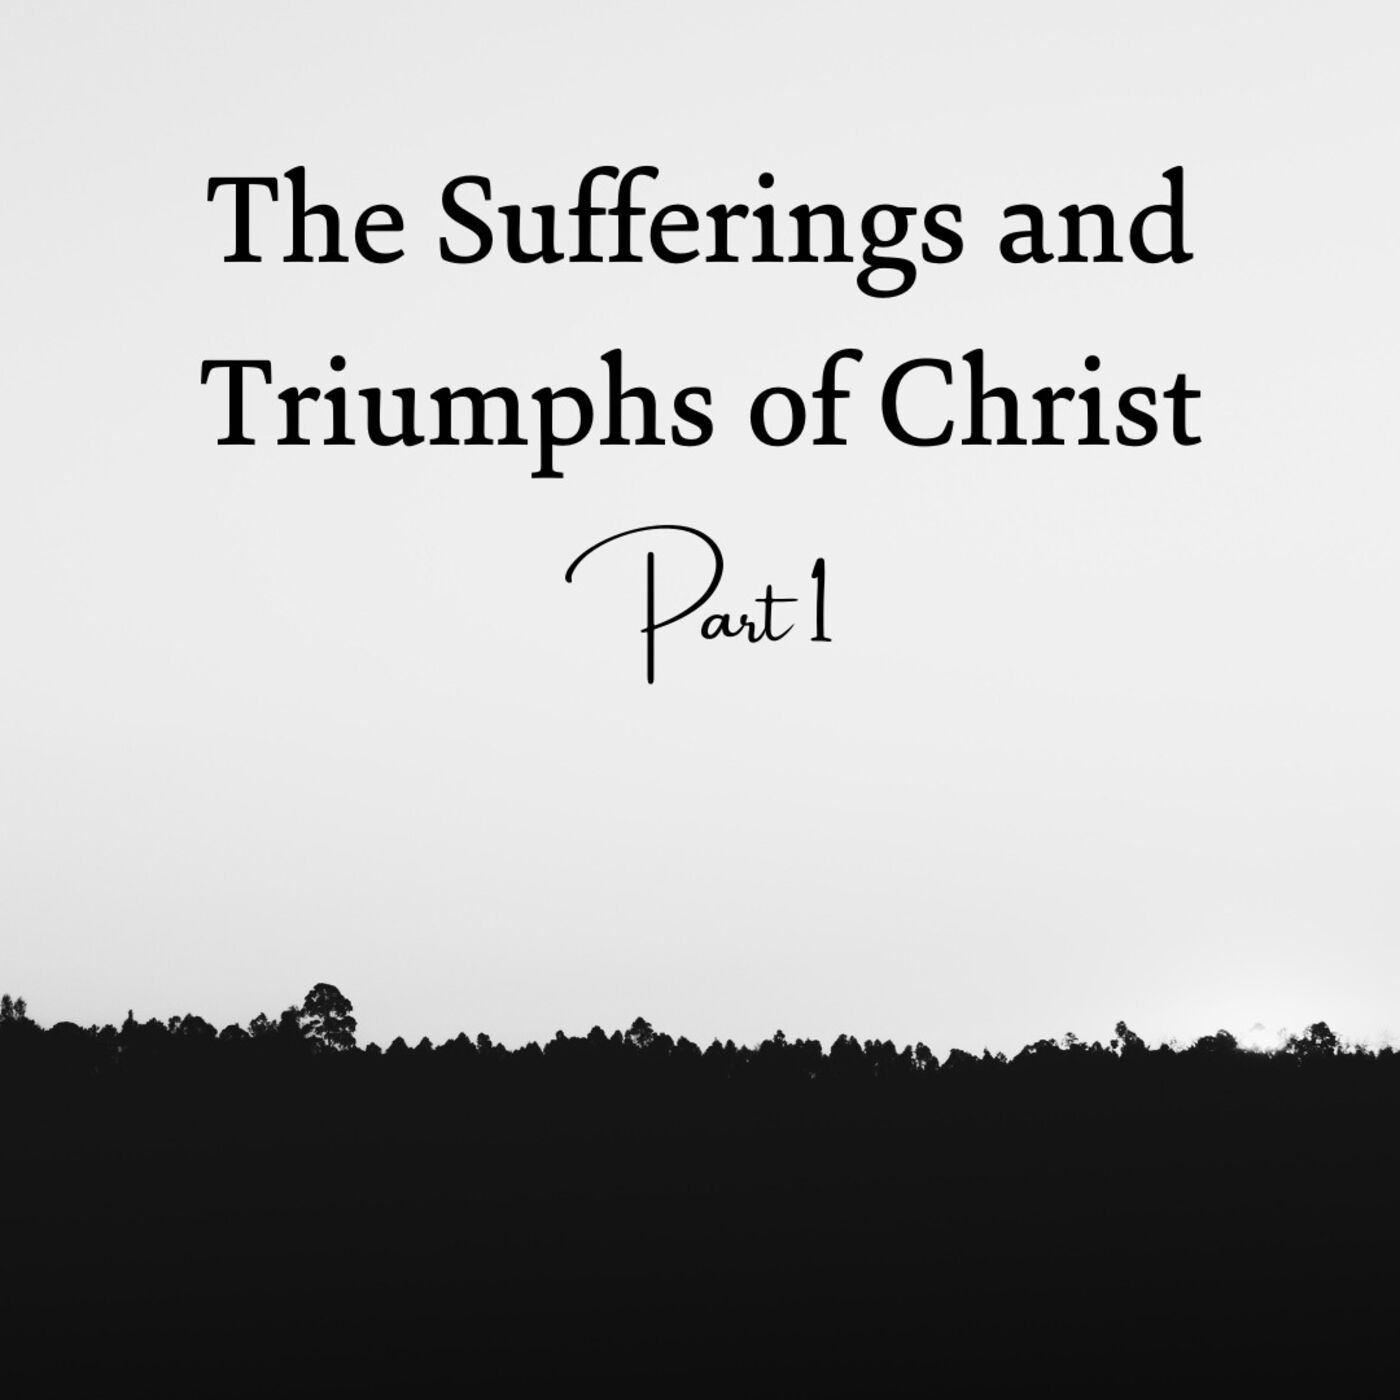 The Sufferings and Triumphs of Christ Part 1